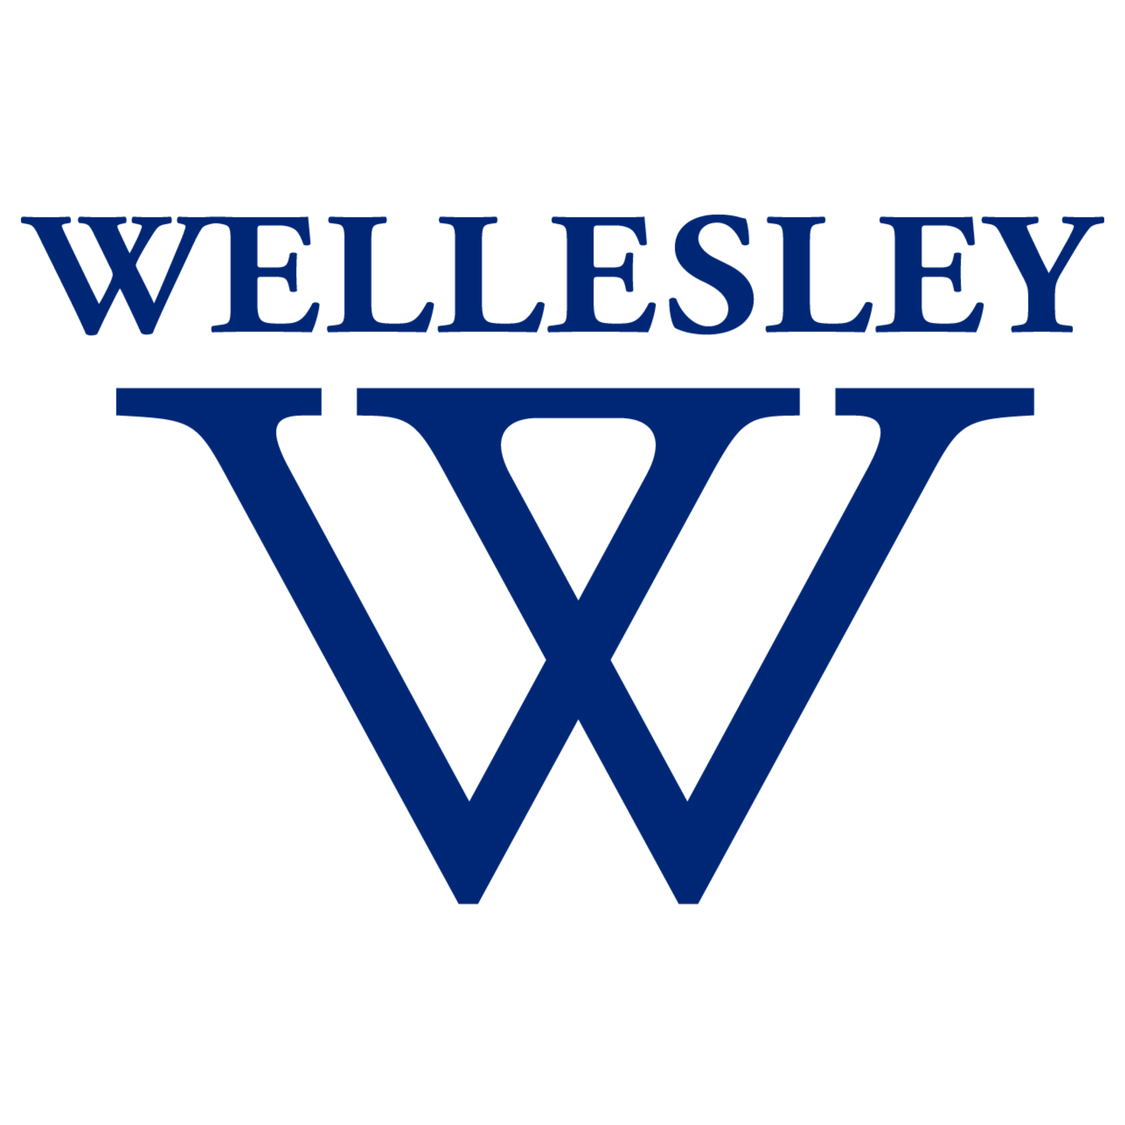 Wellesley logo, In blue text it reads Wellesley. Below is the Wellesley logo made of two large blue W’s superimposed on each other.